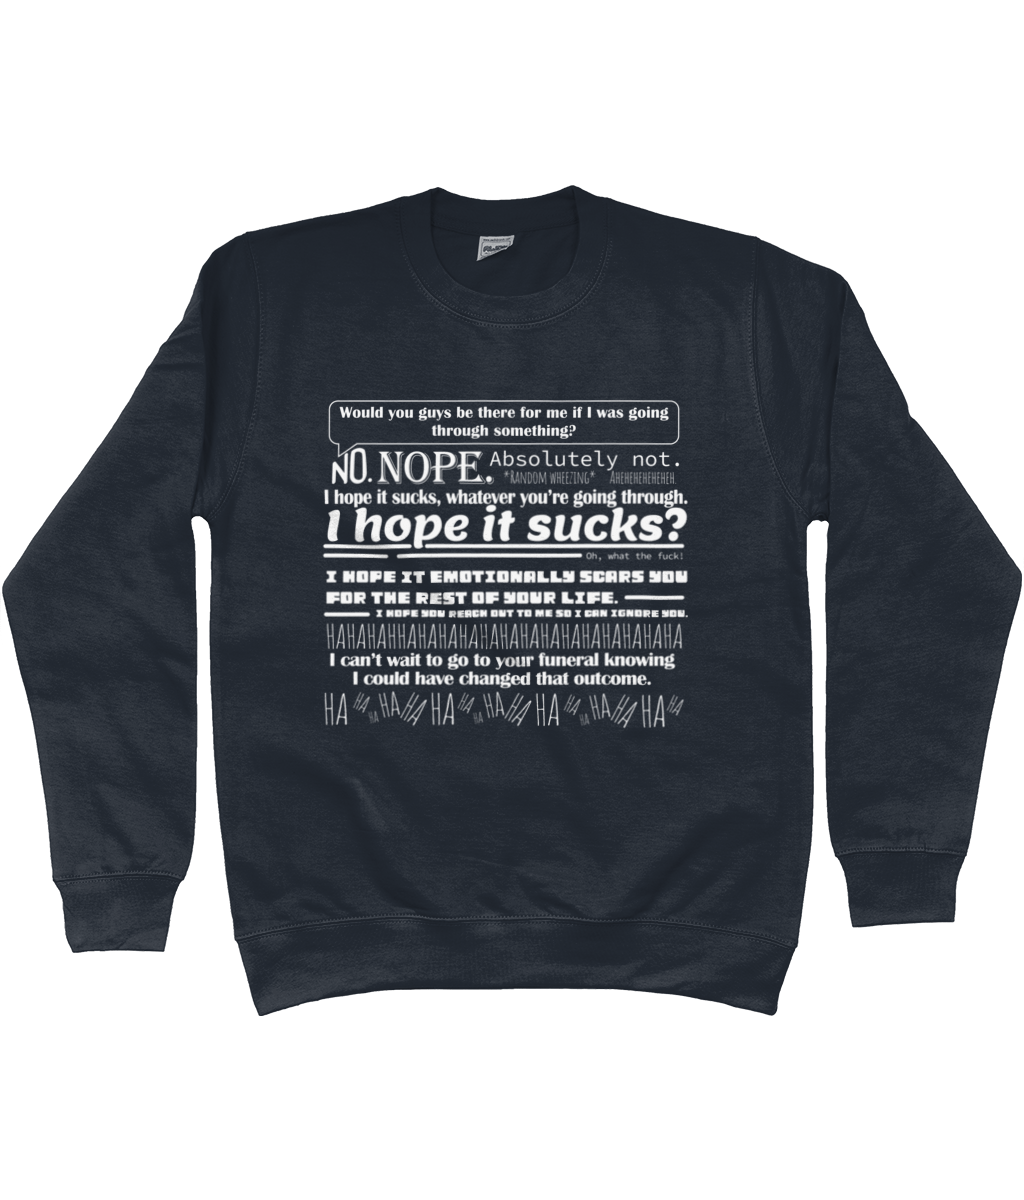 Would You Guys be There for me if I Was Going Through Something Sweatshirt